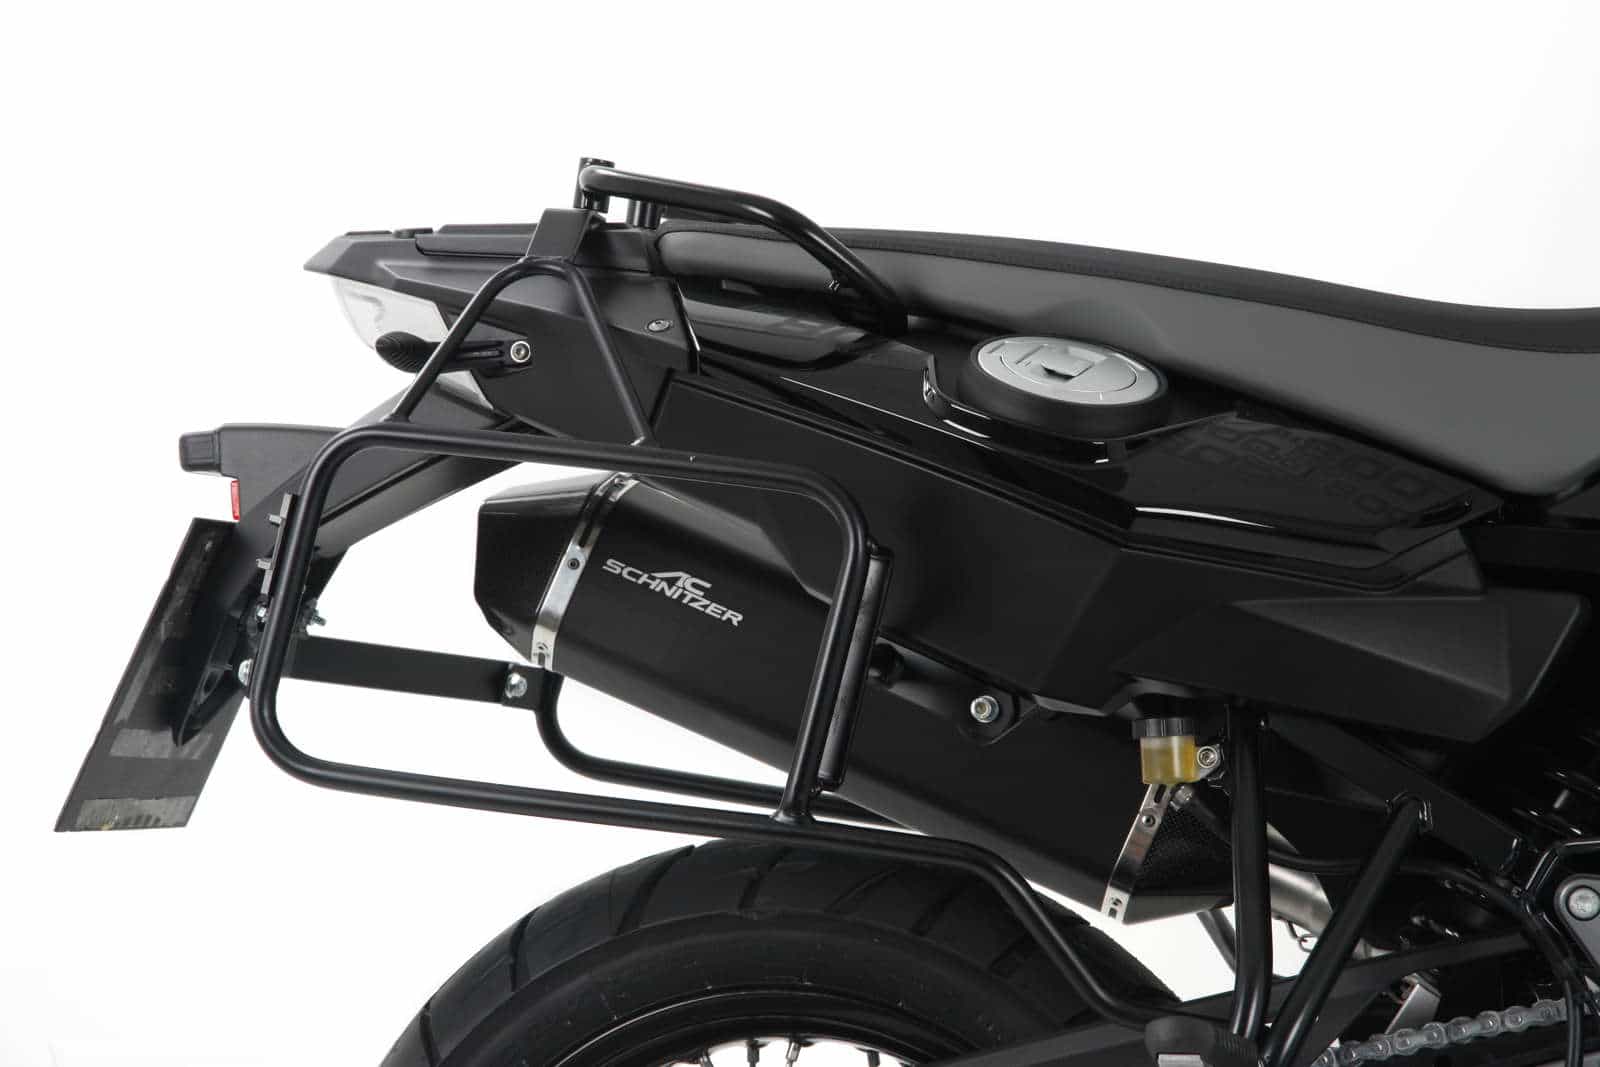 Sidecarrier permanent mounted black for BMW F 650 GS Twin (2008-2011)/F 700 GS (2012-2017)/F 800 GS (2008-2018)